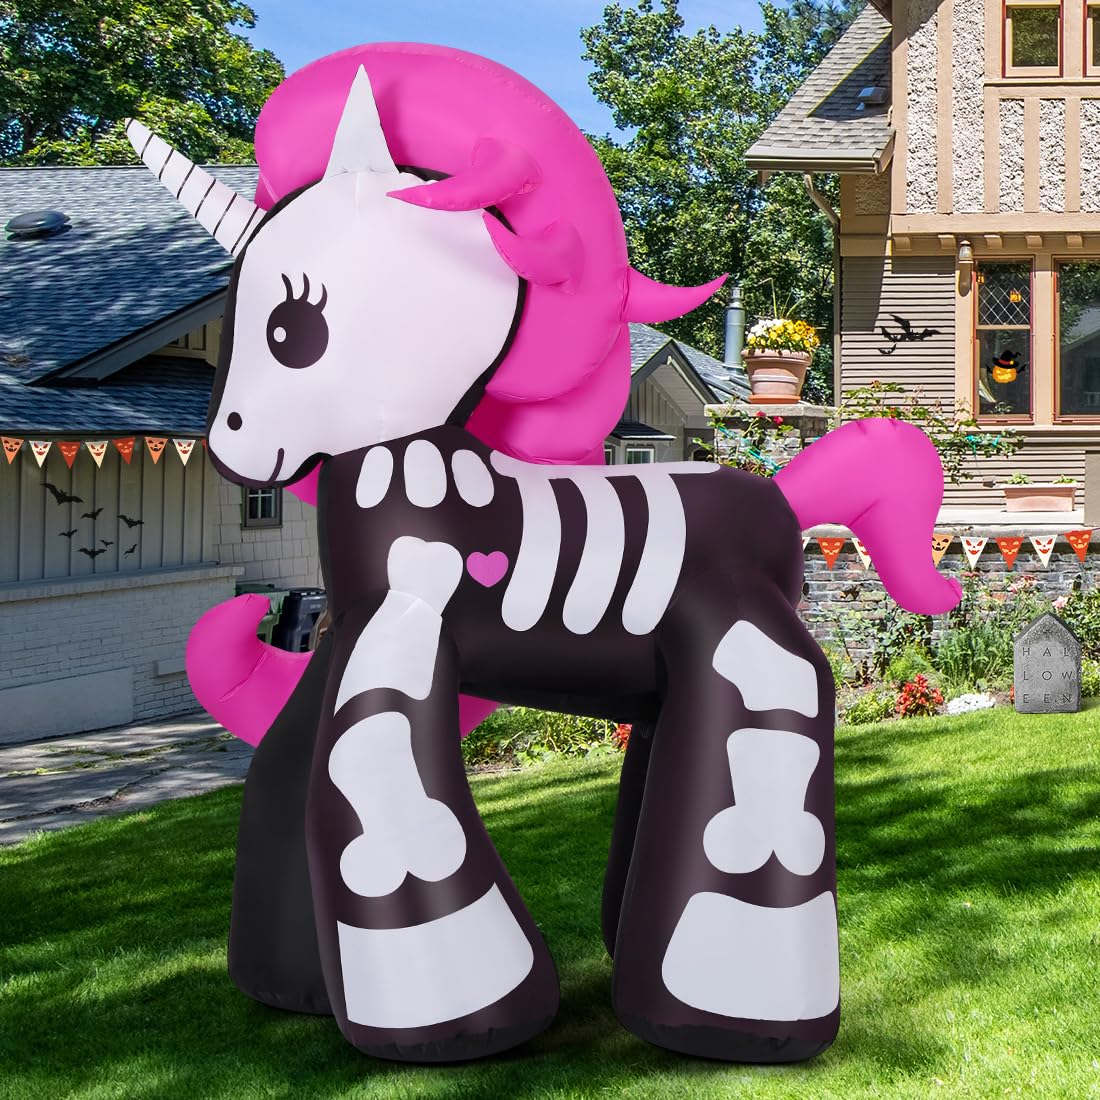 5.2' GOOSH Cute Halloween Unicorn Skeleton Yard Inflatable w/ LED Lights $27 + Free Shipping w/ Prime or on $25 or $35+